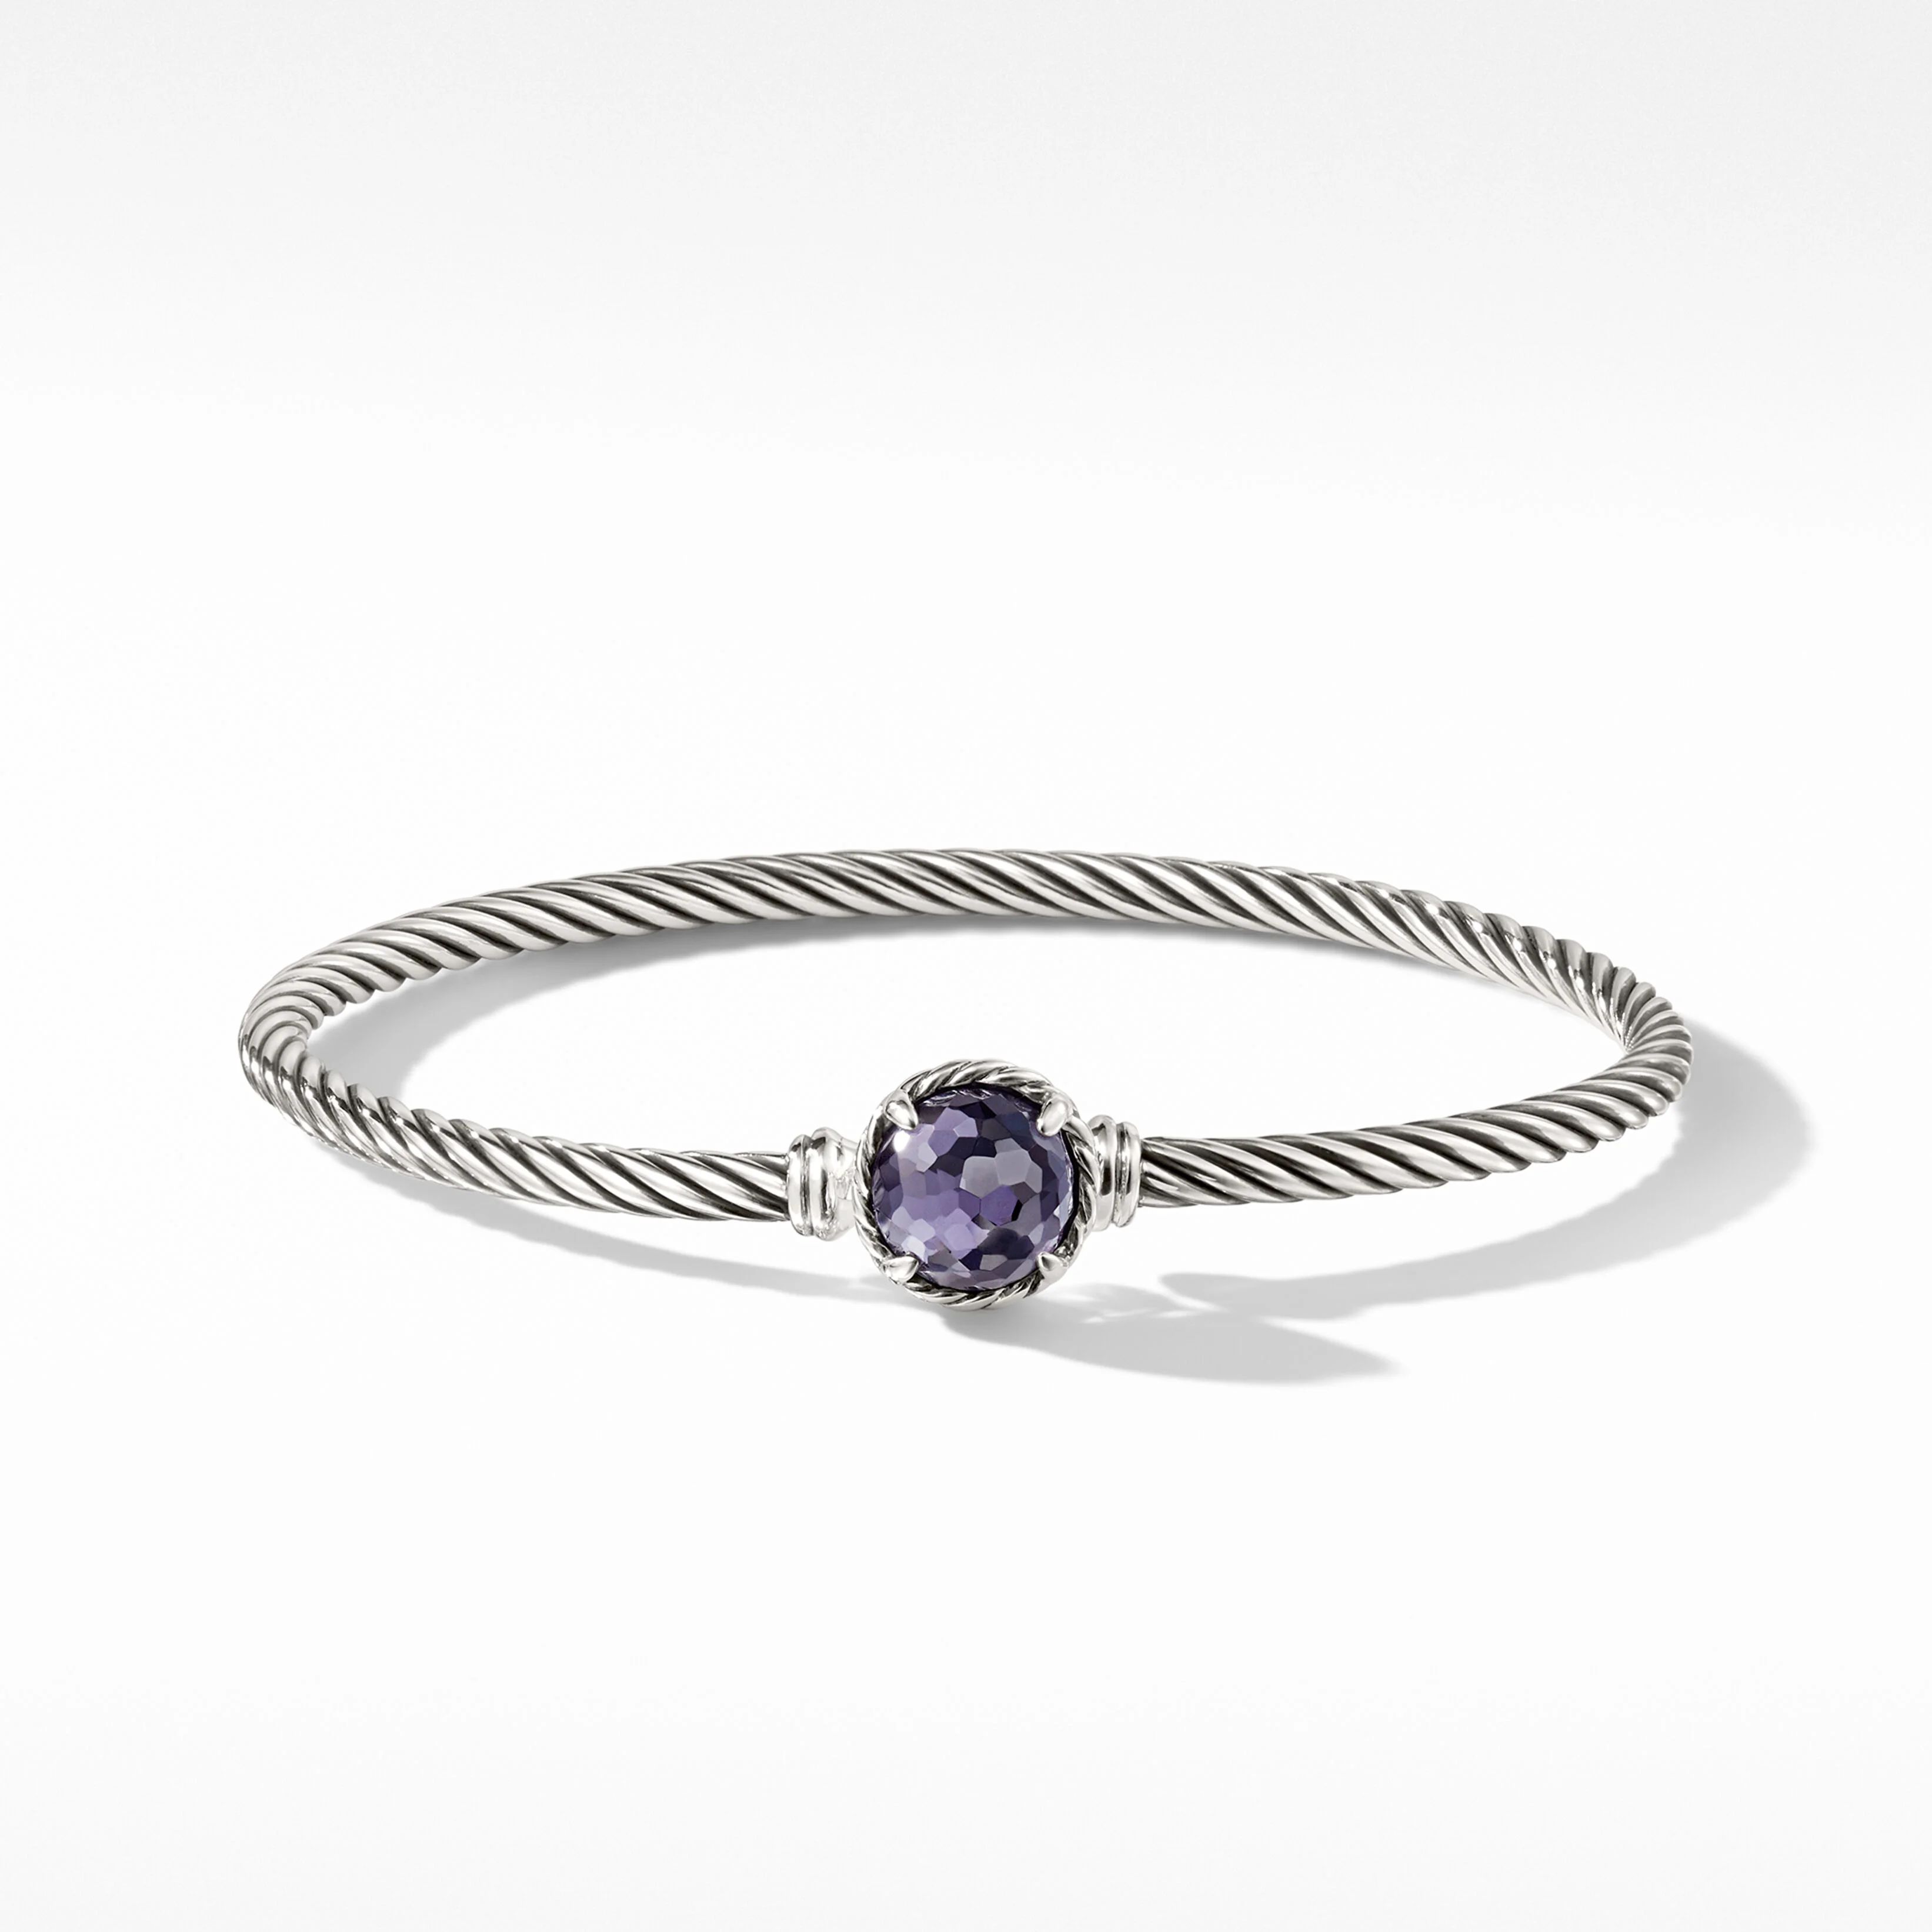 Petite Chatelaine® Bracelet in Sterling Silver with Black Orchid | David Yurman